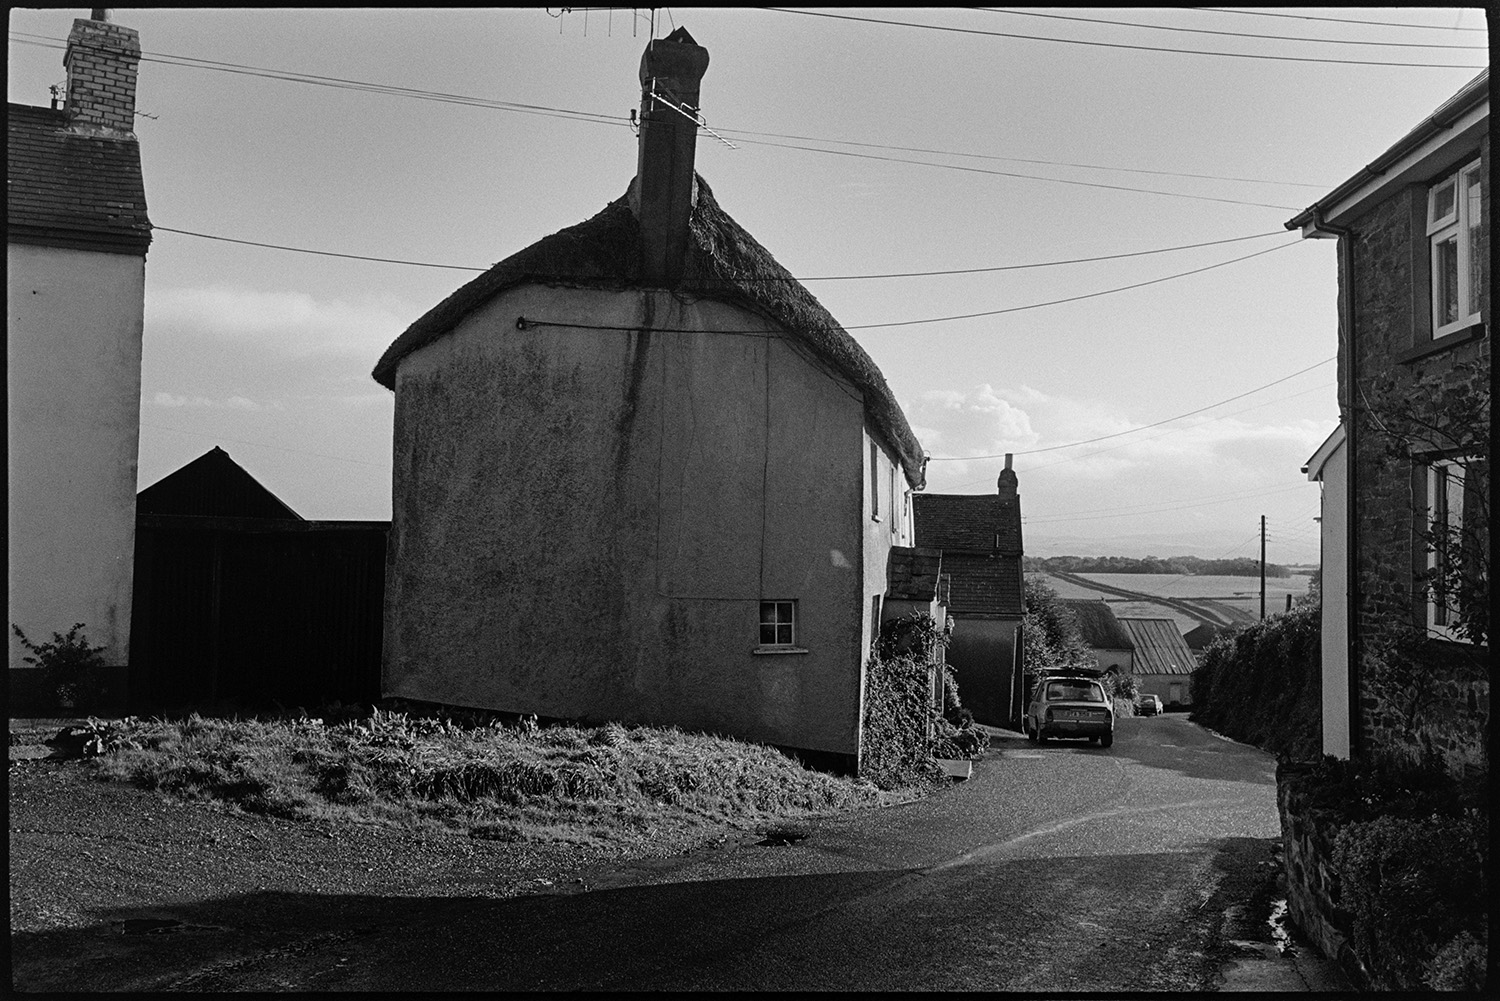 Road with thatched cottage at lower end of village.
[A road at the lower end of Winkleigh, showing a thatched cottage, other village houses and hills and fields in the distance.]